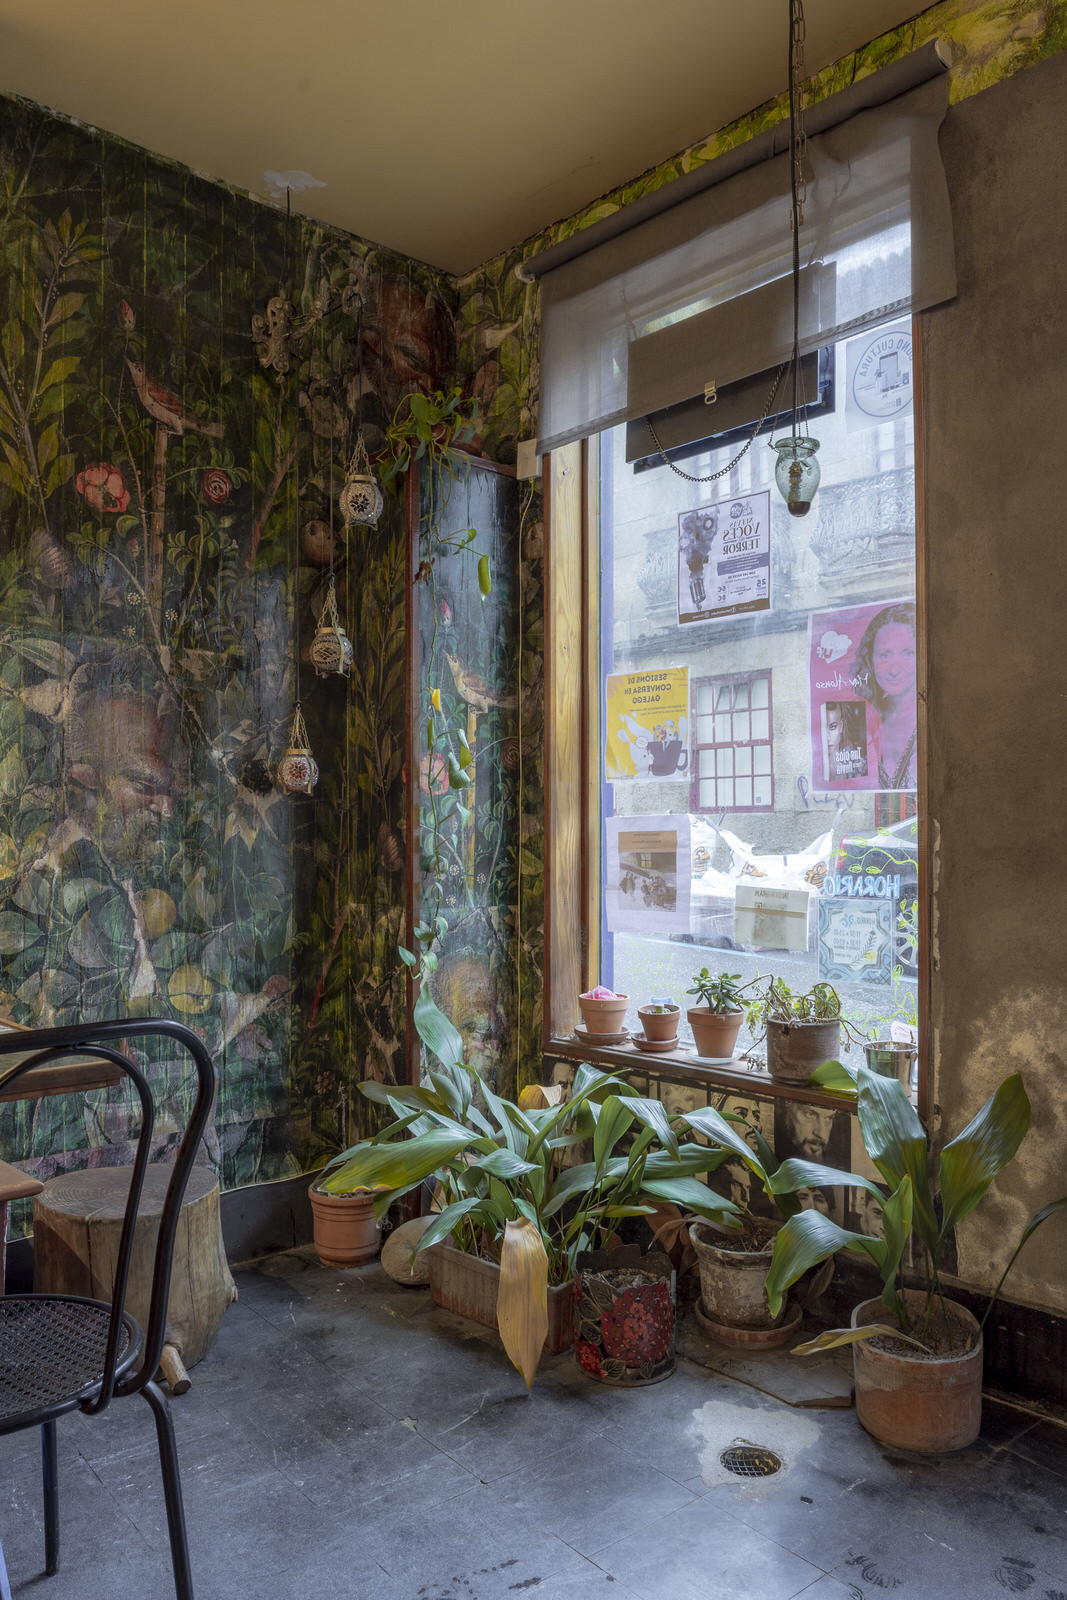 Image of the interior of the cafeteria, with a window, plants and a wall painted with flowers